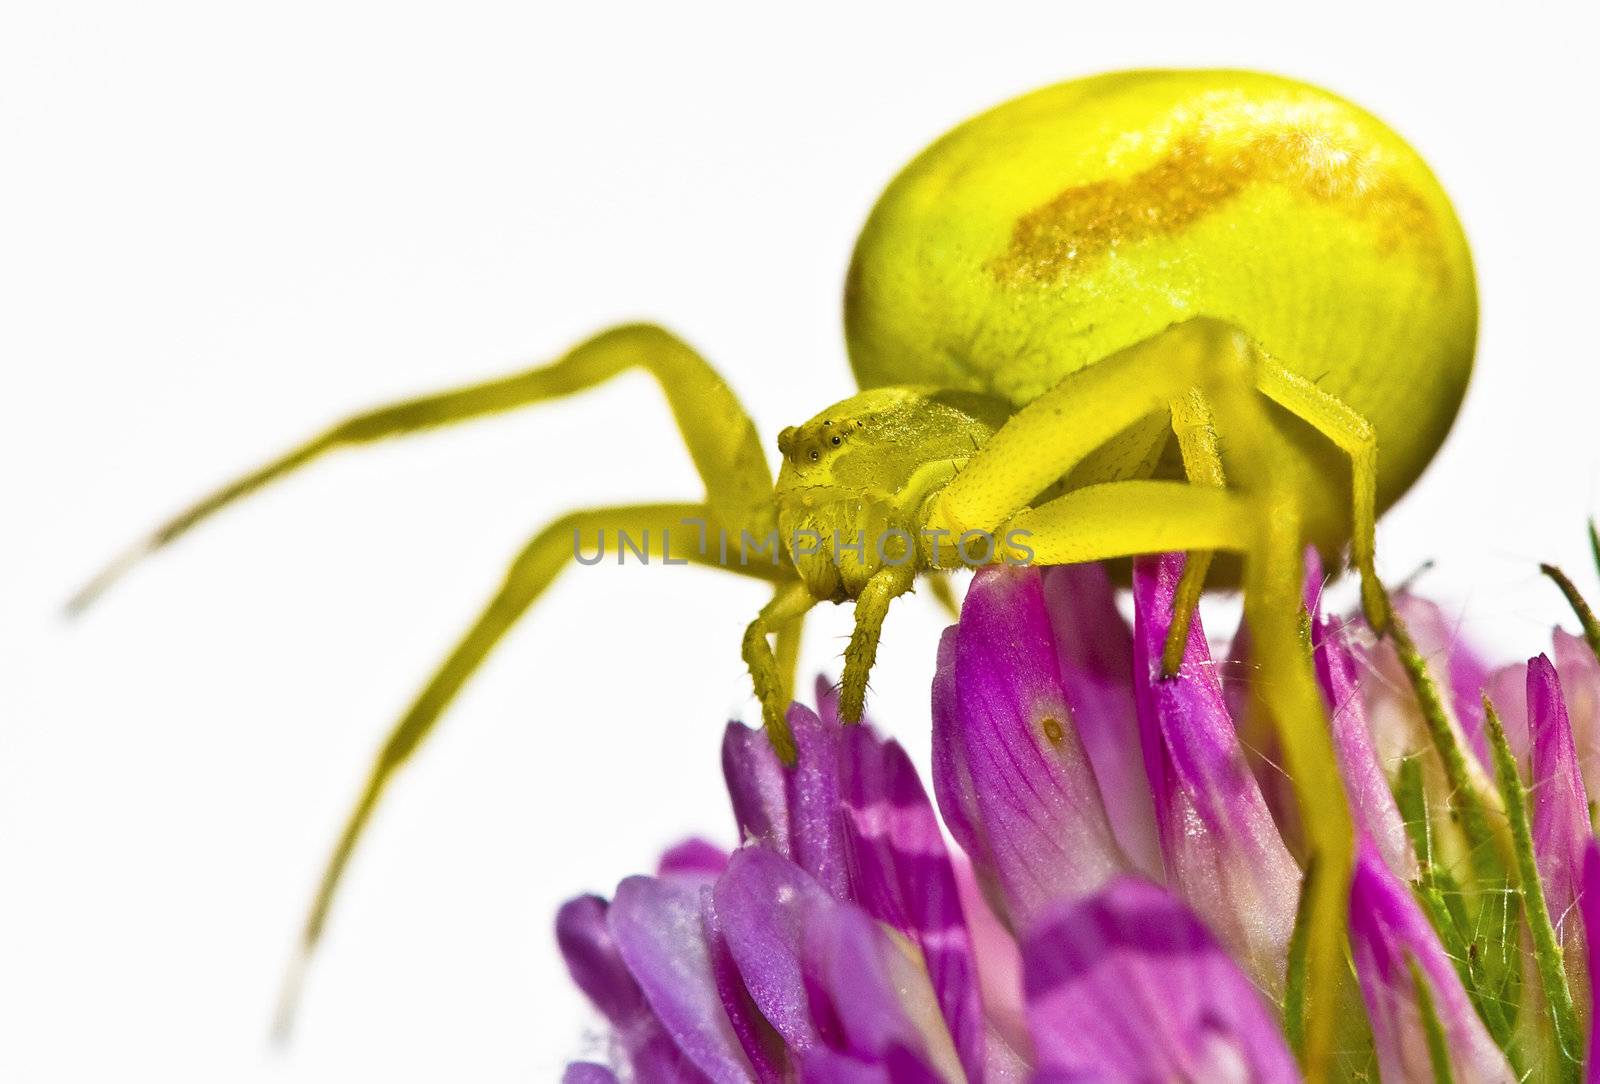 Goldenrod crab spider by Jupe